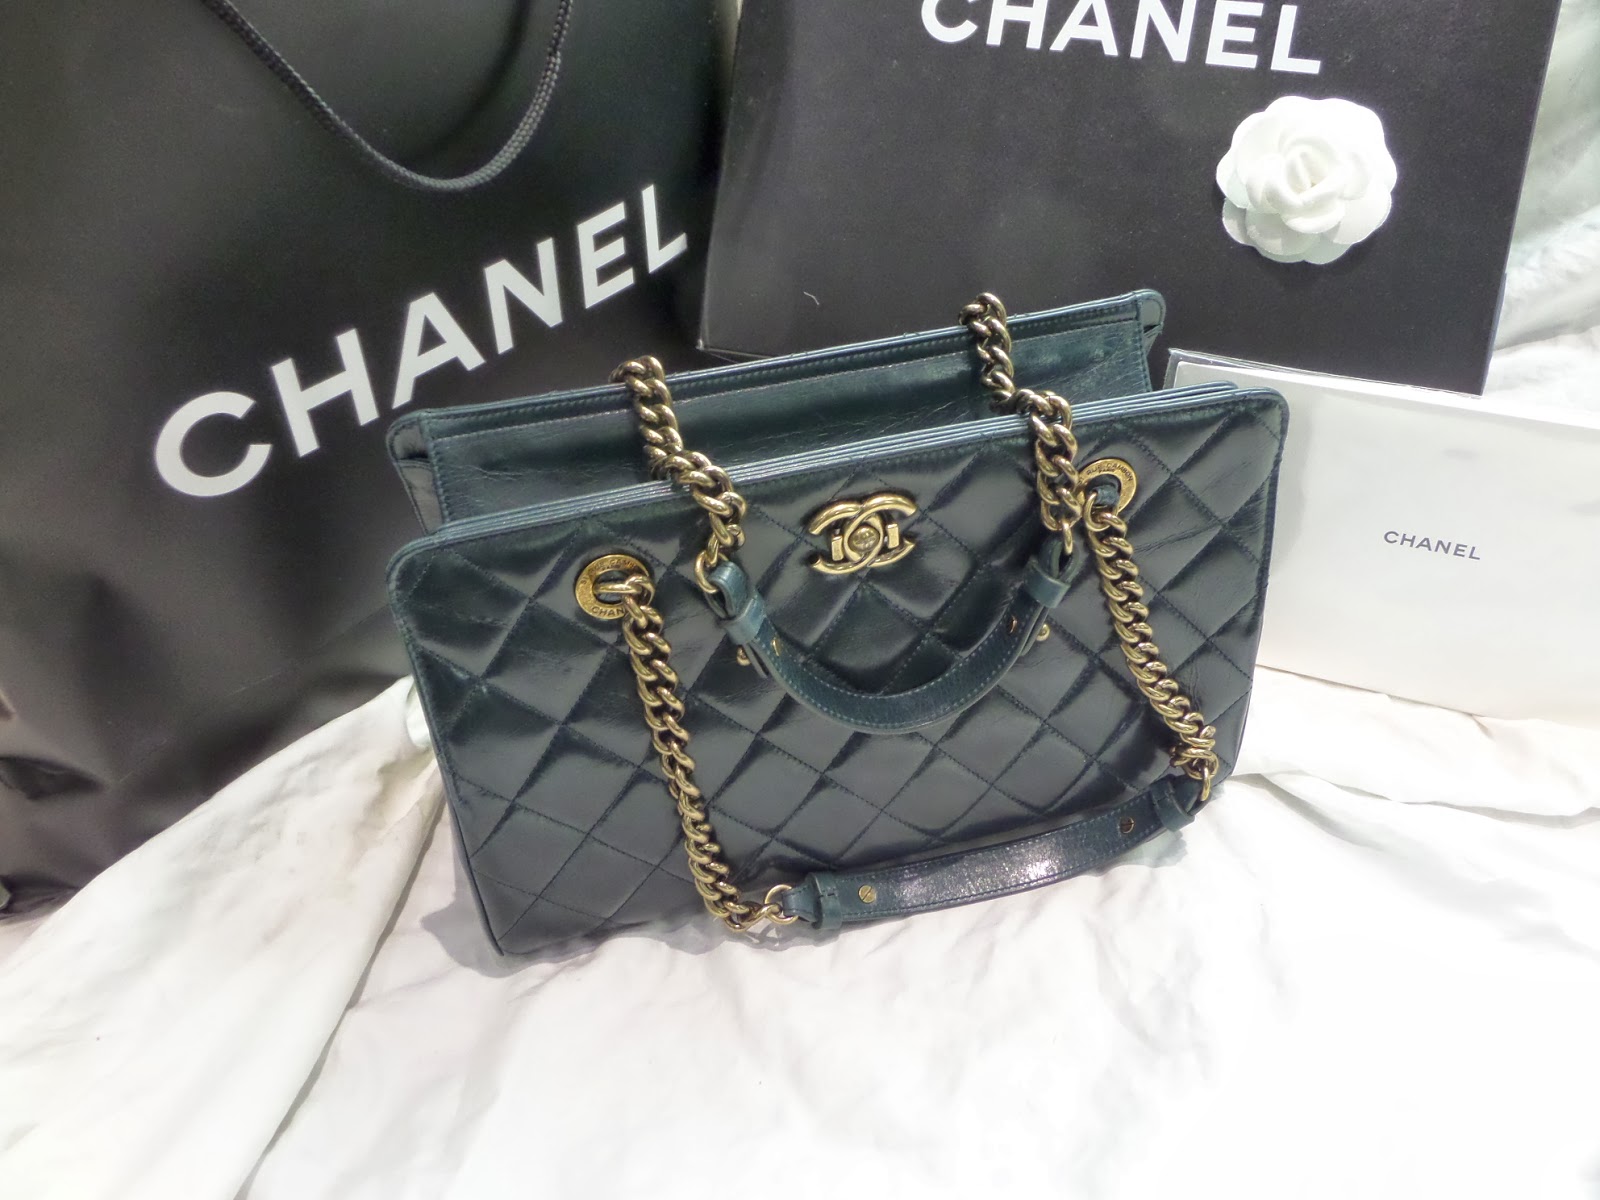 Vancouver Luxury Designer Consignment Shop 二手奢侈品寄卖店: Chanel Perfect Edge  Tote Bag ~ Consign Buy Sell Authentic Designer Consignment Vancovuer